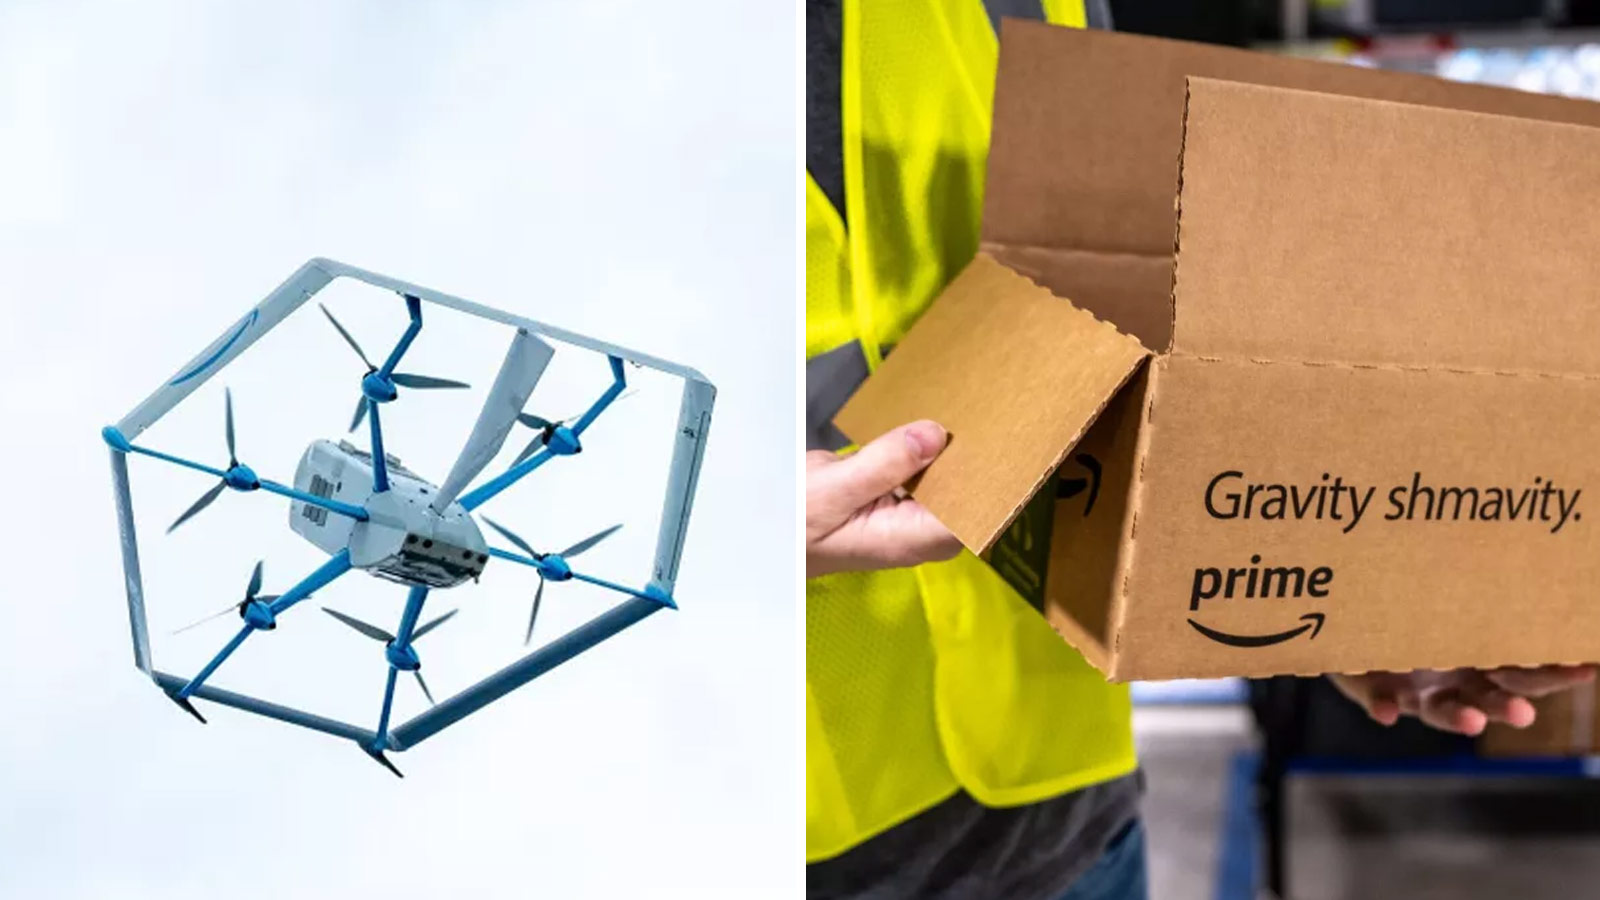 Split image of an Amazon delivery drone in the sky on the left and an Amazon box that says "Gravity...